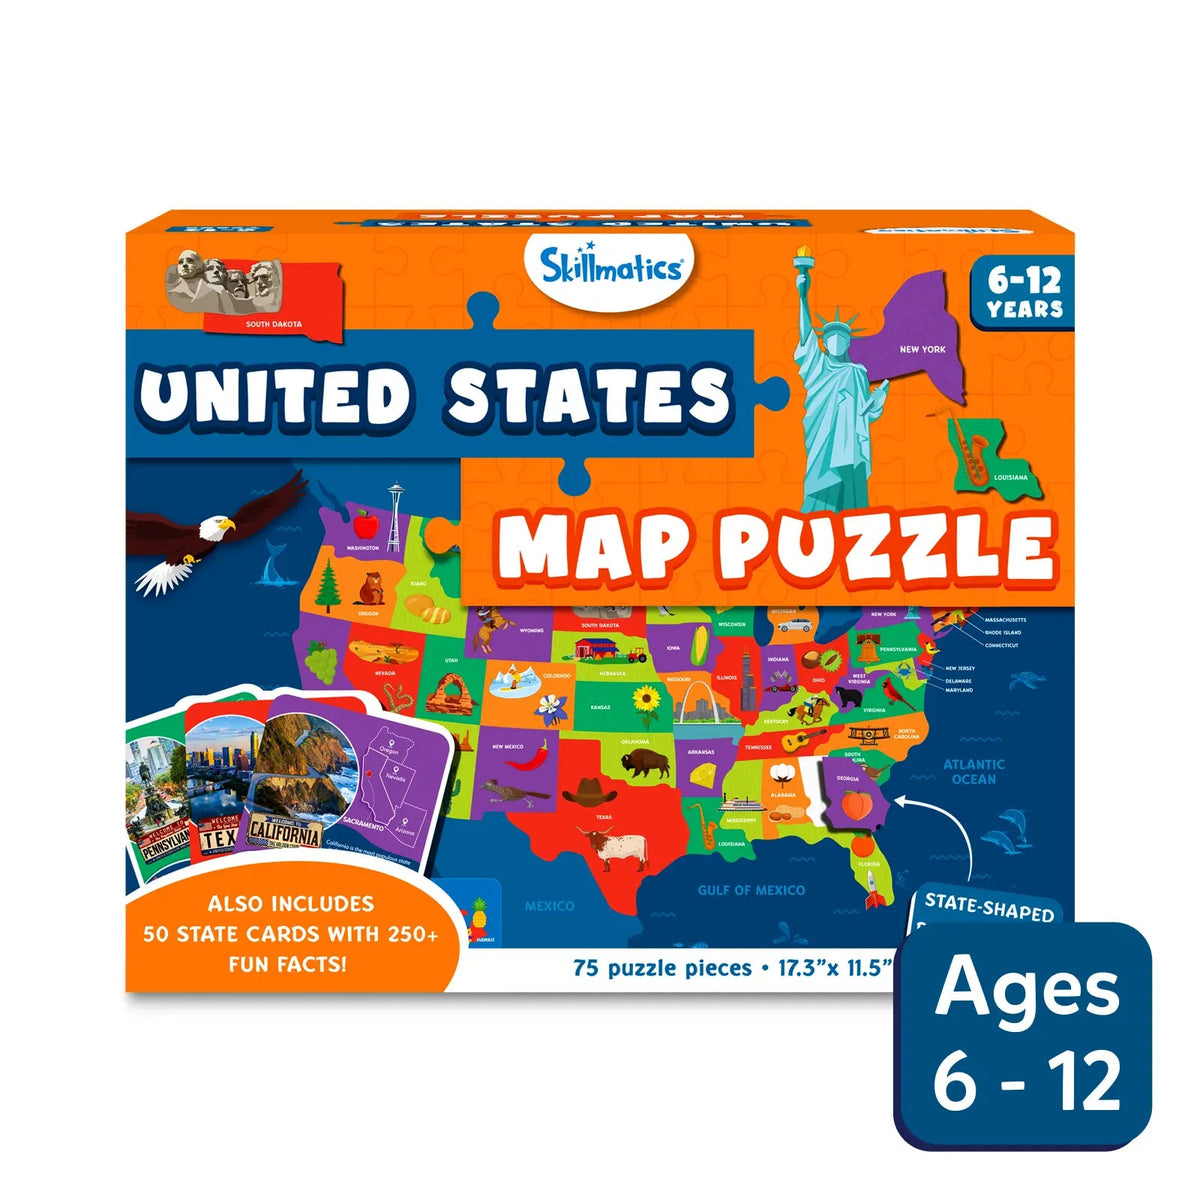 United States Map Puzzle Cover